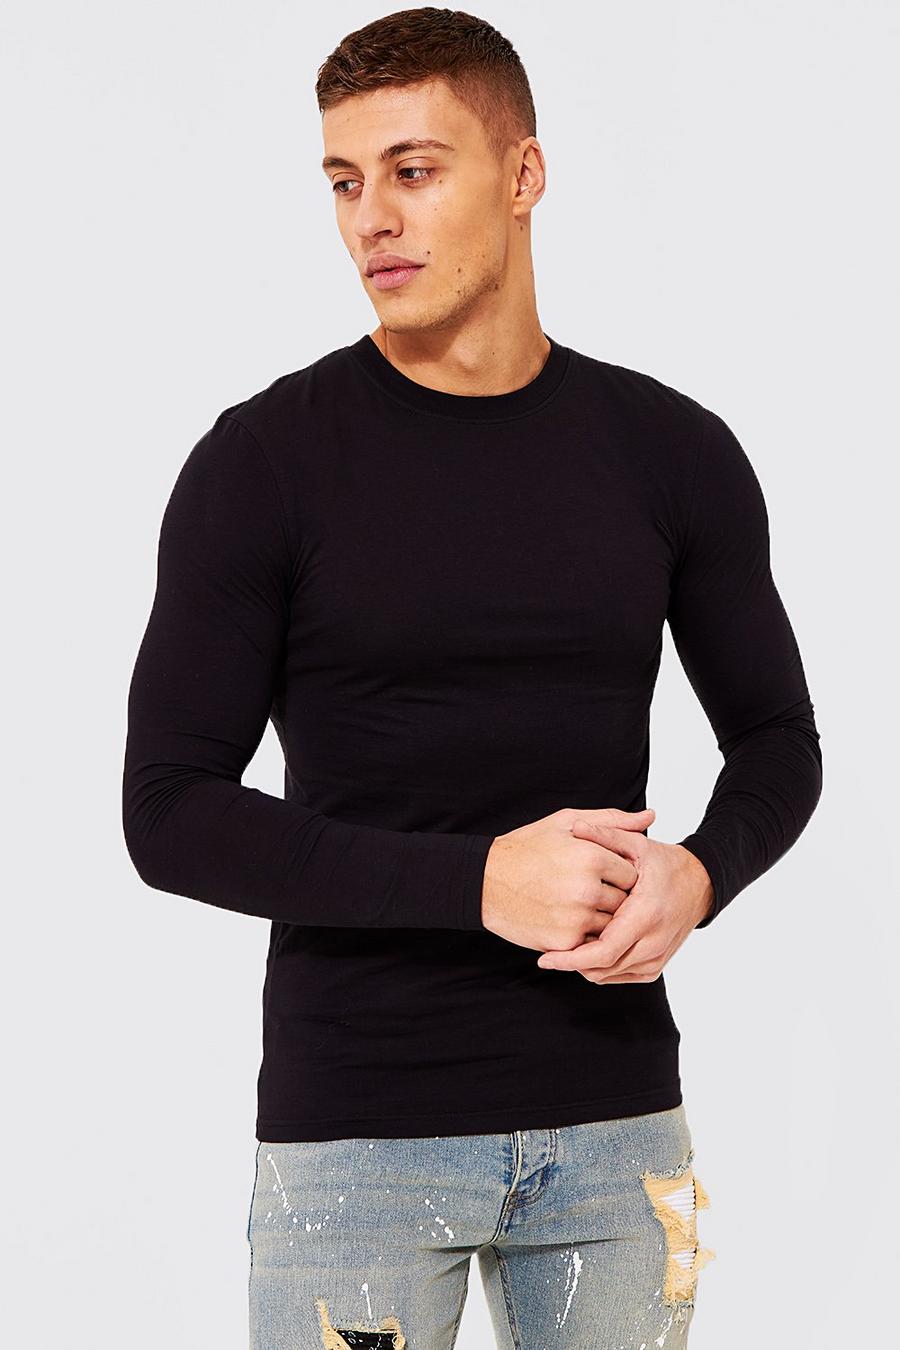 Black Long Sleeve Muscle T-Shirt image number 1